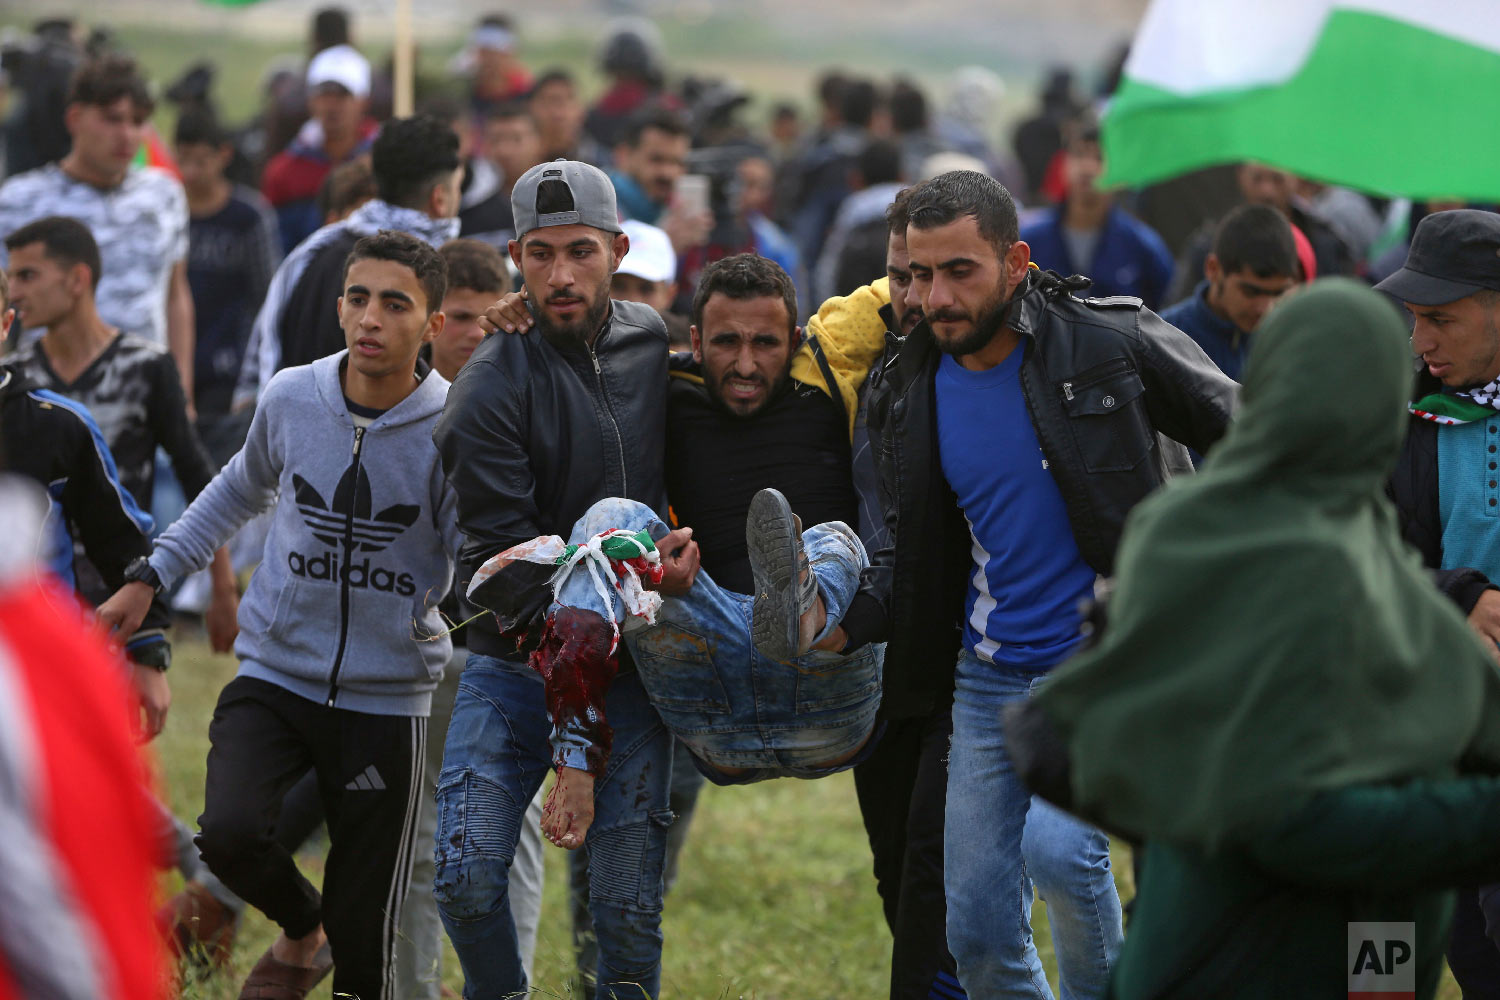  Palestinian protesters carry a wounded man was shot by Israeli troops during a demonstration near the Gaza Strip border with Israel, in eastern Gaza City, Friday, March 30, 2018. (AP Photo/ Khalil Hamra) 